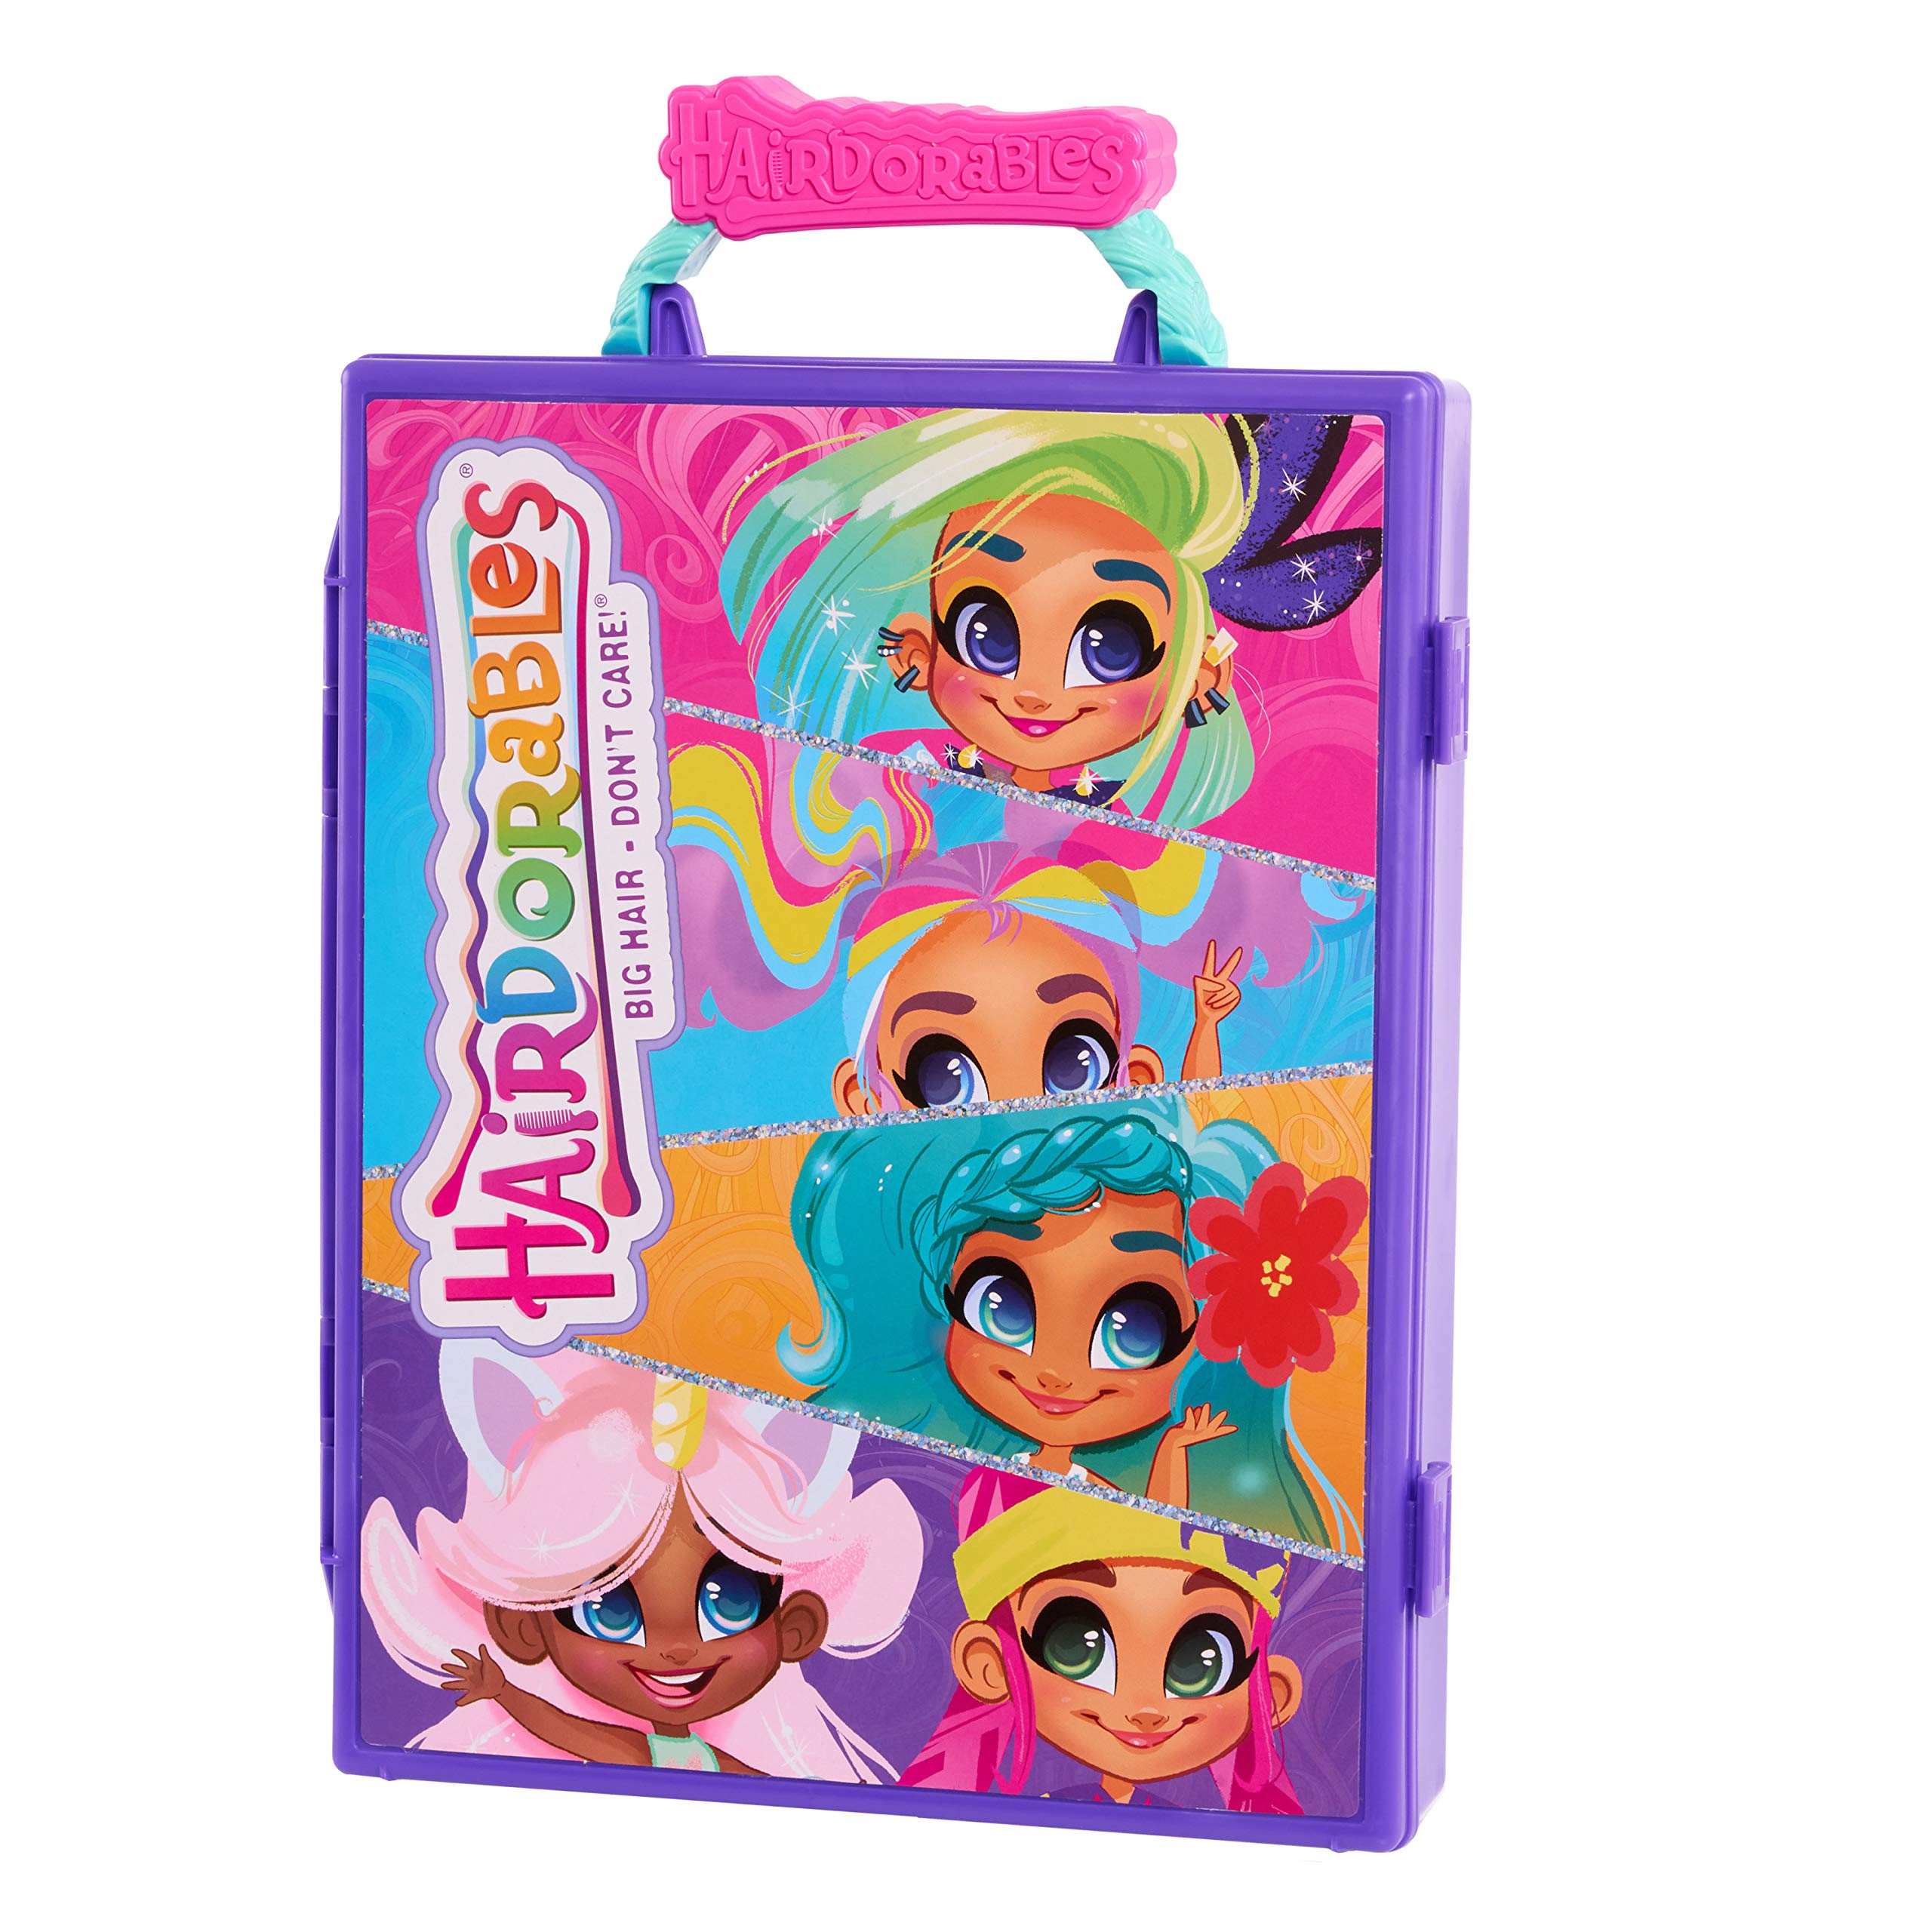 Hairdorables Storage Case, Kids Toys for Ages 3 Up, Gifts and Presents by Just Play